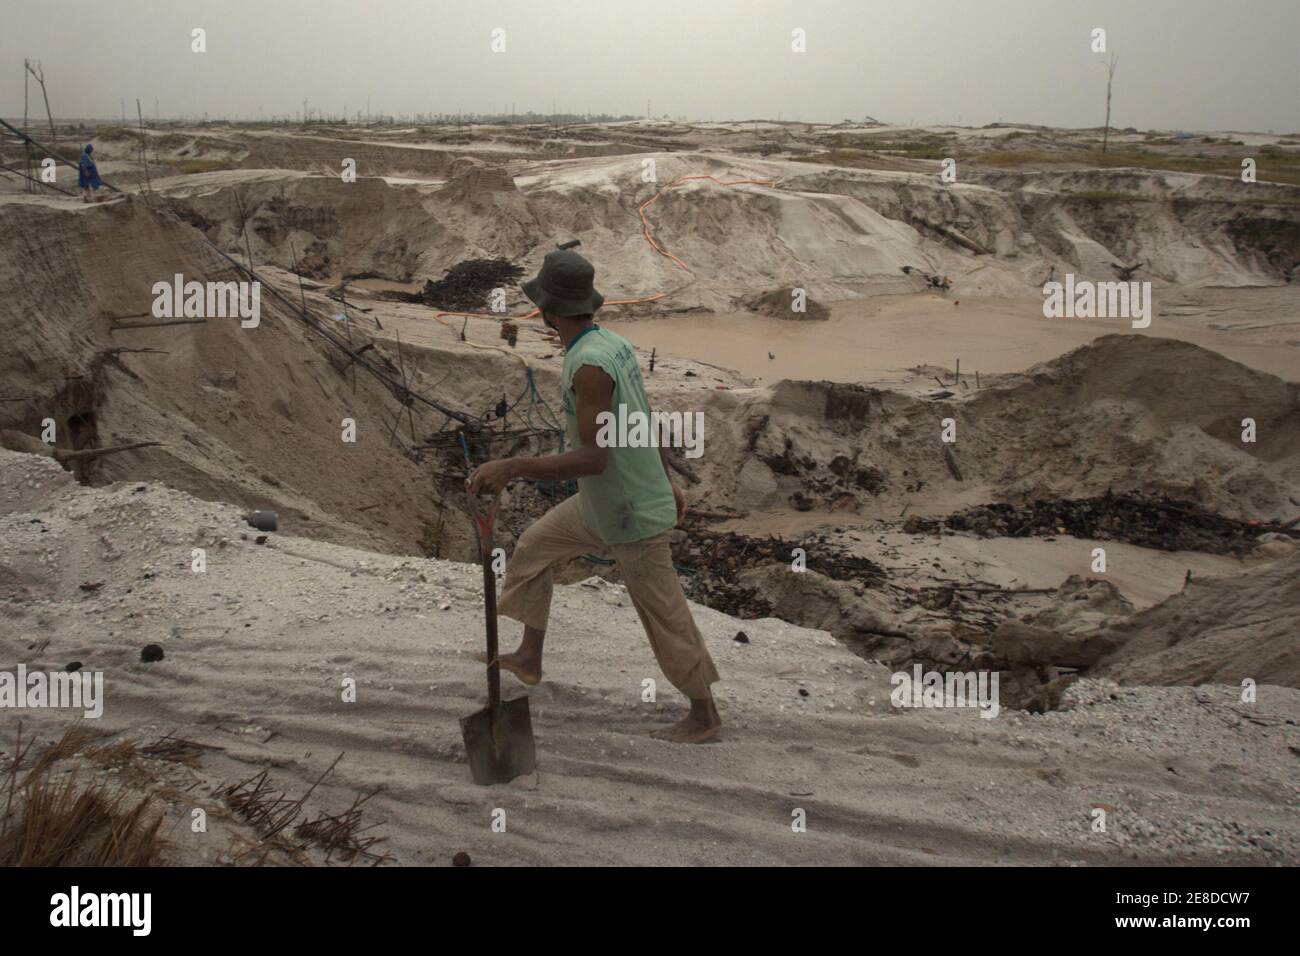 A gold miner walking on the sandy landscape of the small-scale gold mining area in Hampalit, Katingan regency, Central Kalimantan province, Indonesia. Stock Photo